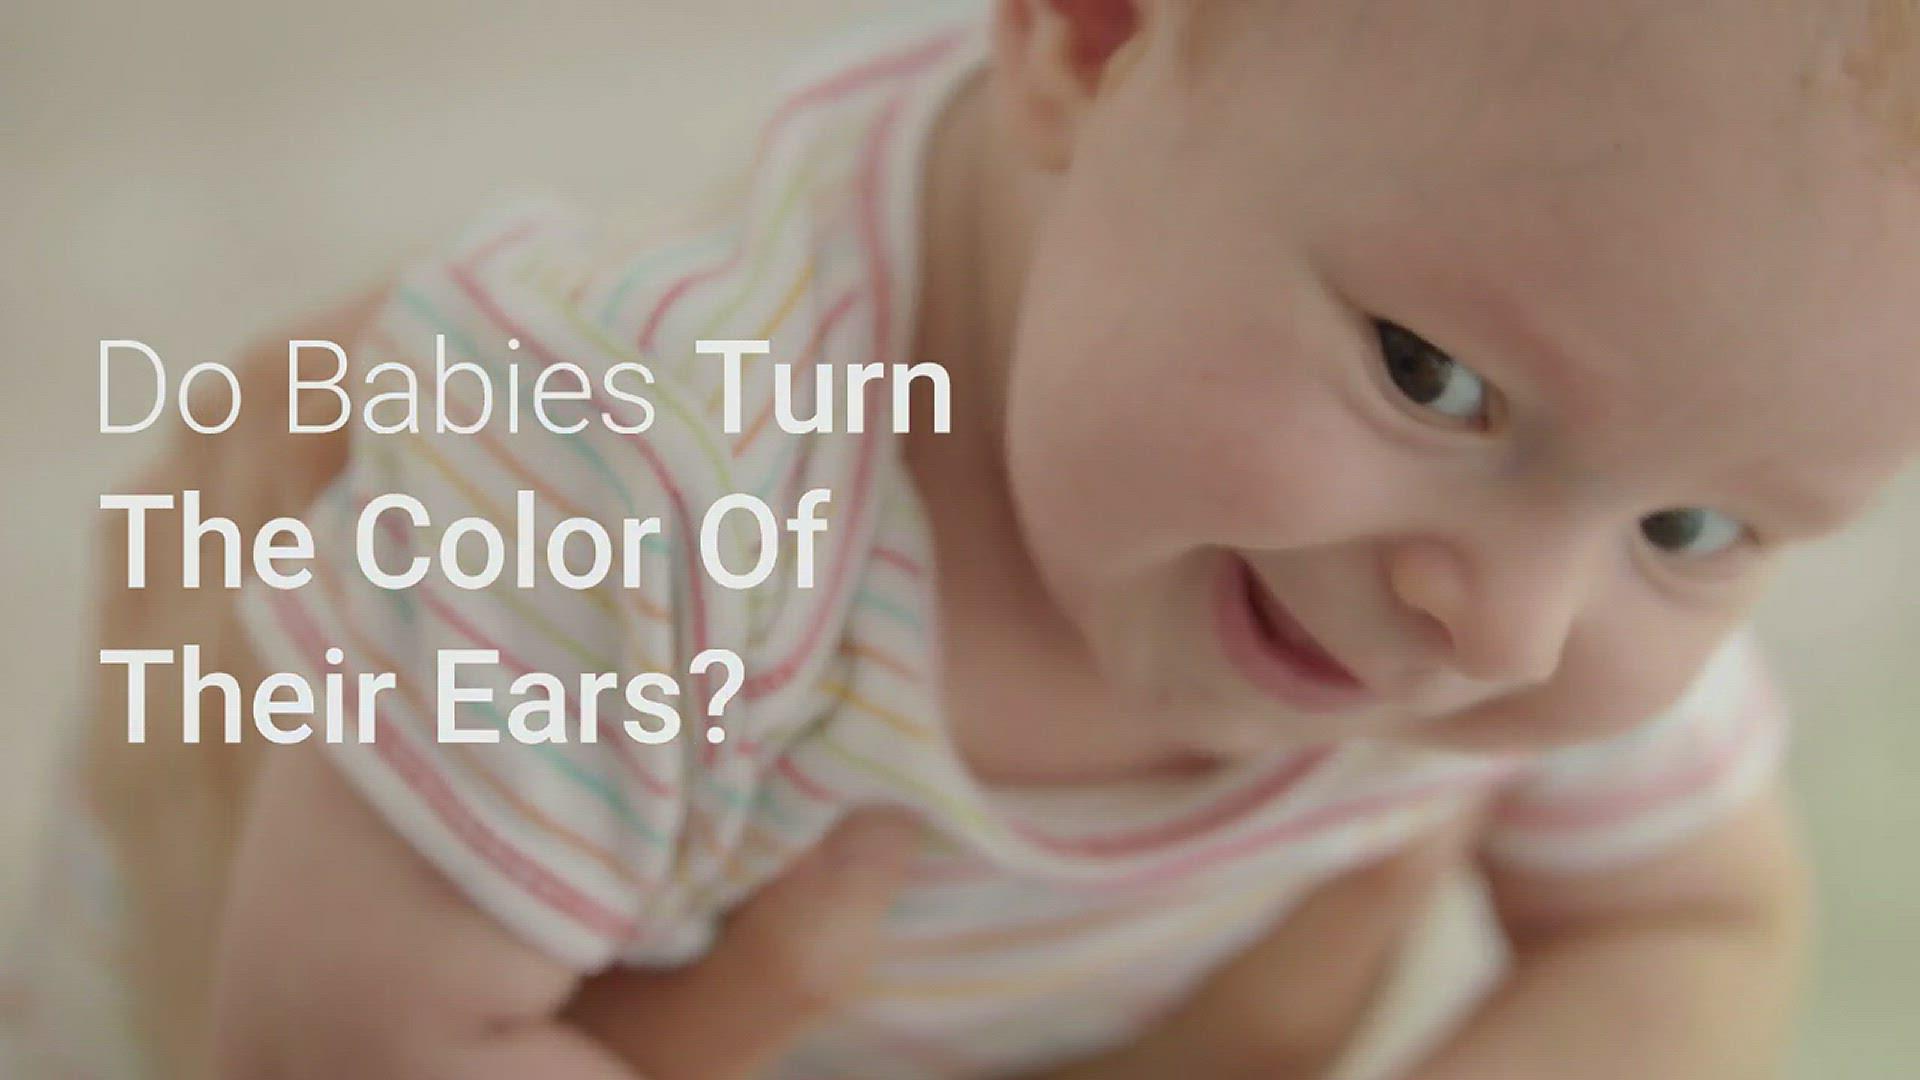 'Video thumbnail for Babies Turn The Color Of Their Ears'